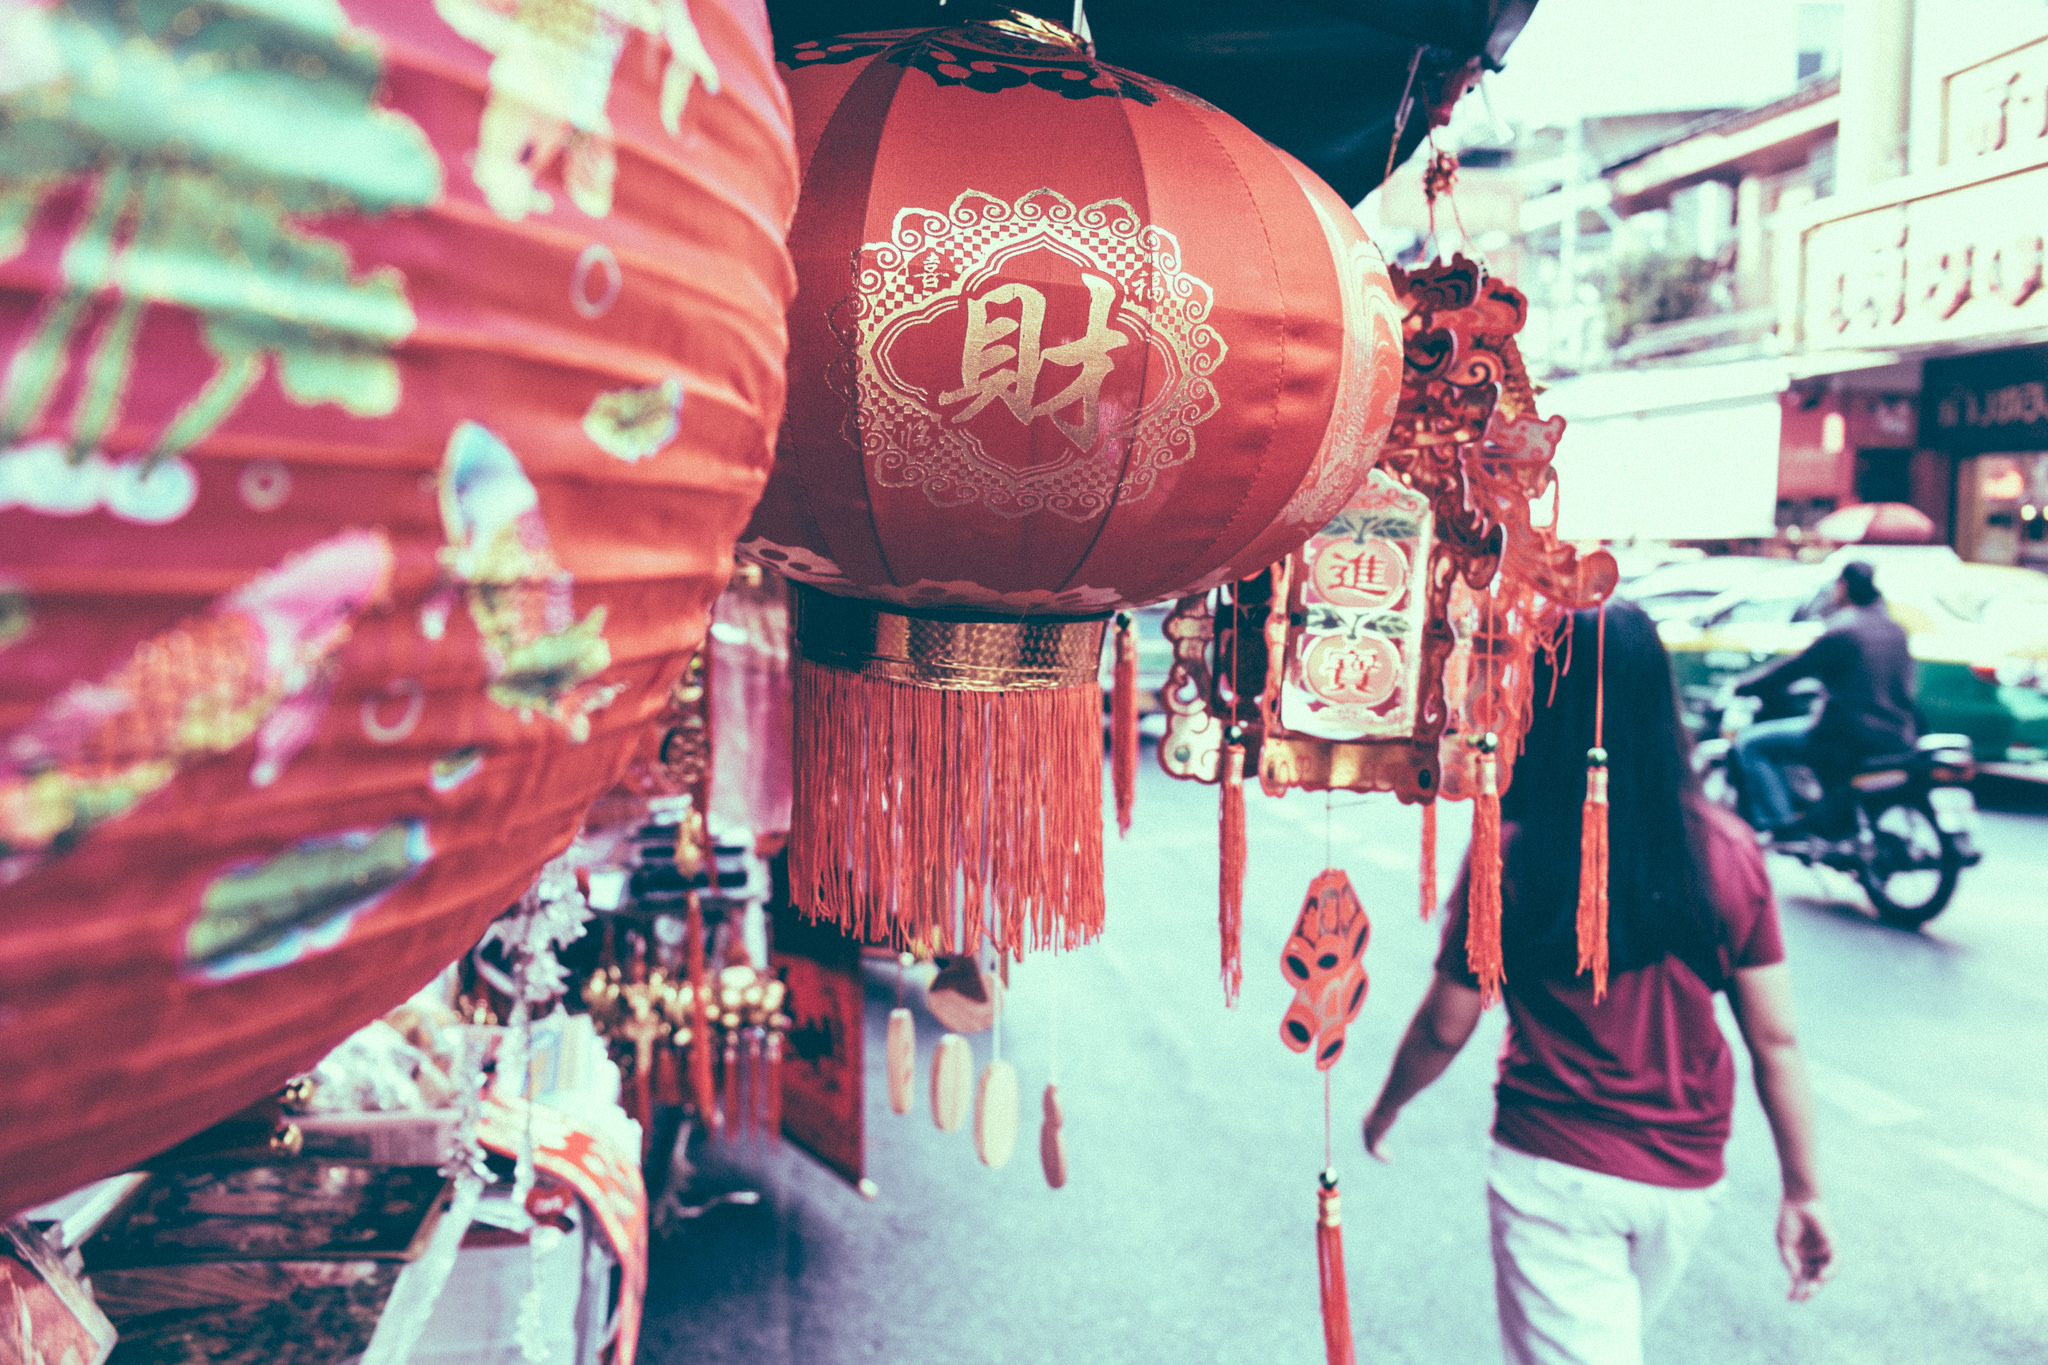 Authentic Chinese lanterns hanging on a street in Bangkok's Chinatown (Photo: Feroswelt via Flickr)